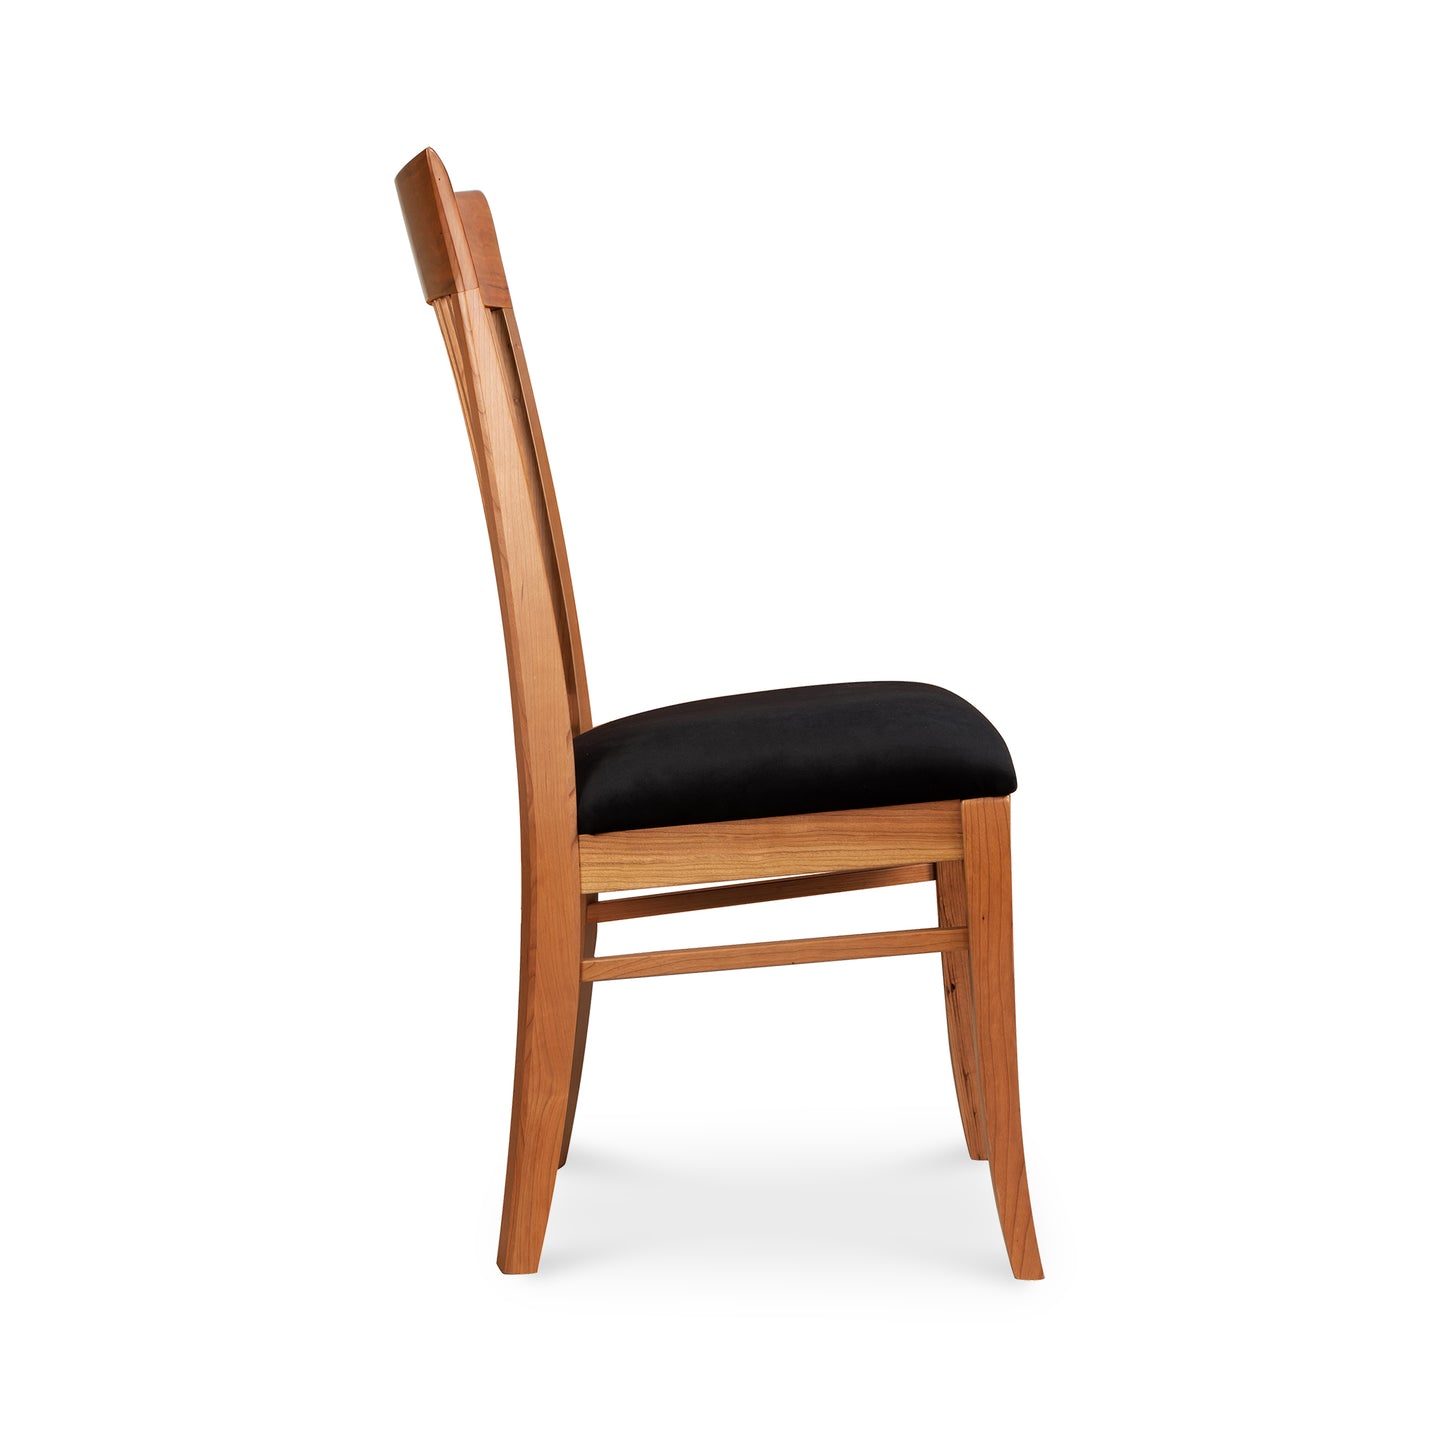 Side view of a Vermont Woods Studios Contemporary Shaker chair with a slanted back and a black cushioned seat, isolated on a white background.